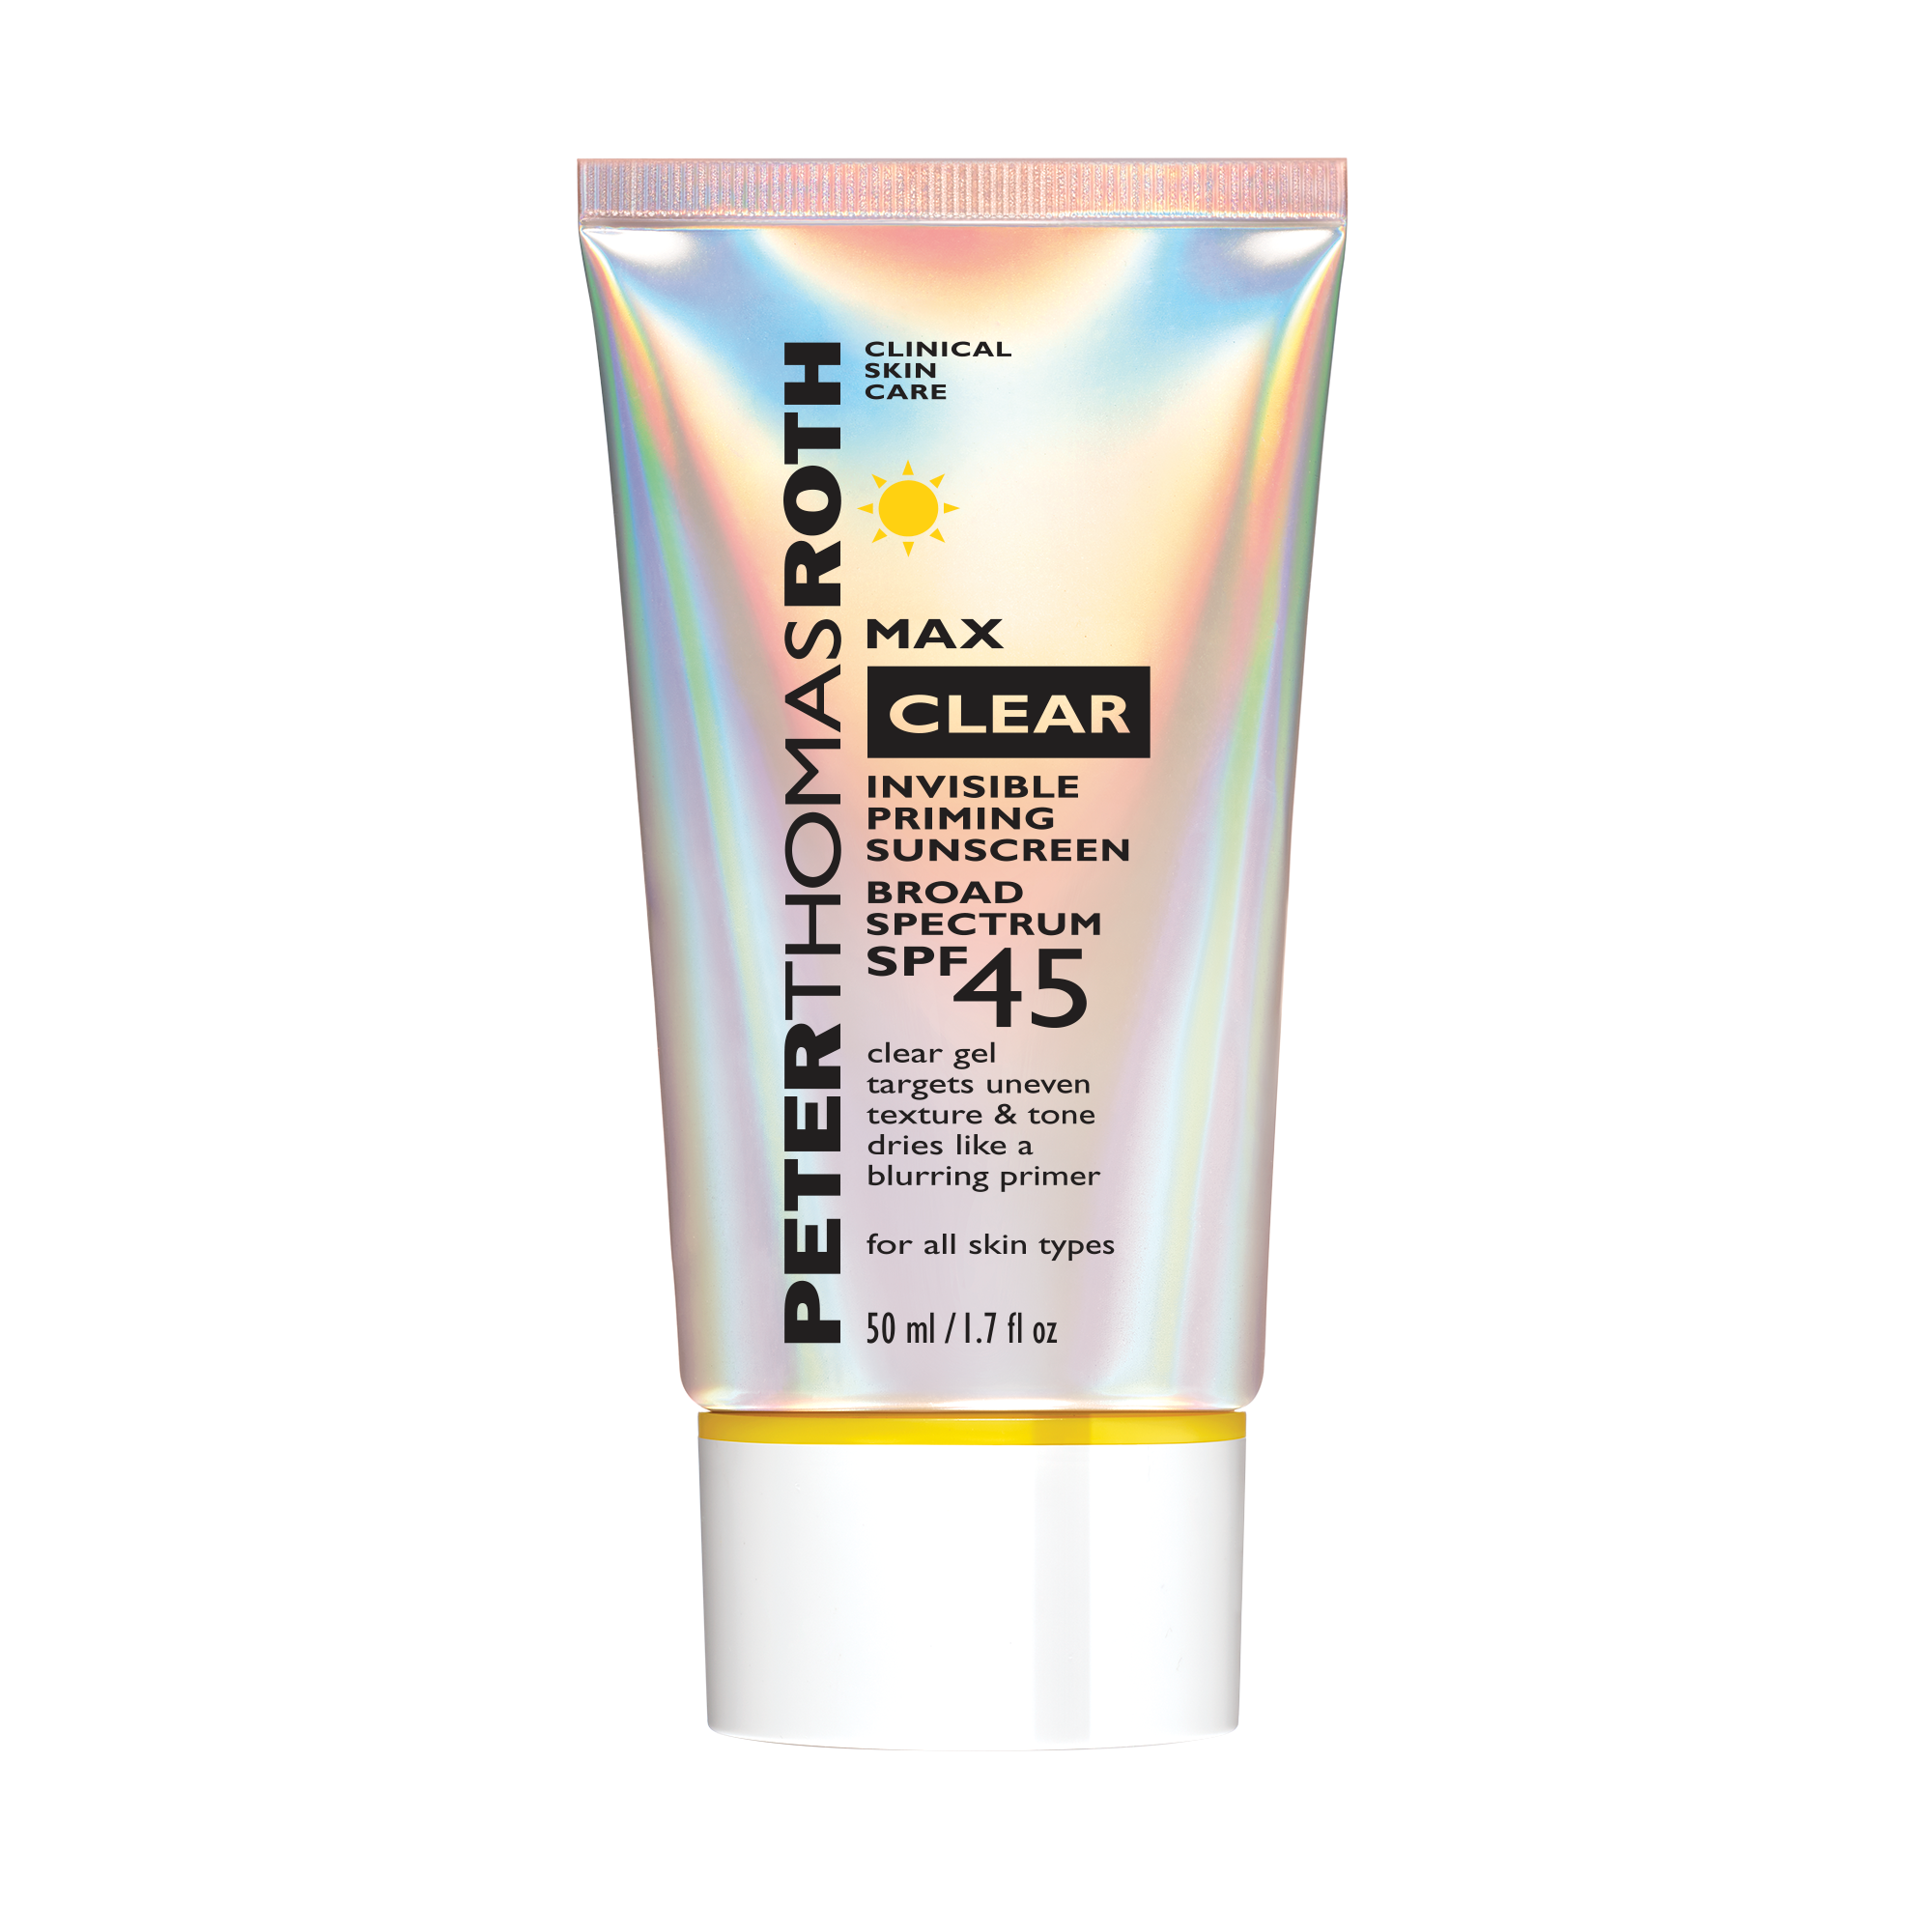 Max Clear Invisible Priming Sunscreen Broad Spectrum SPF 45  1